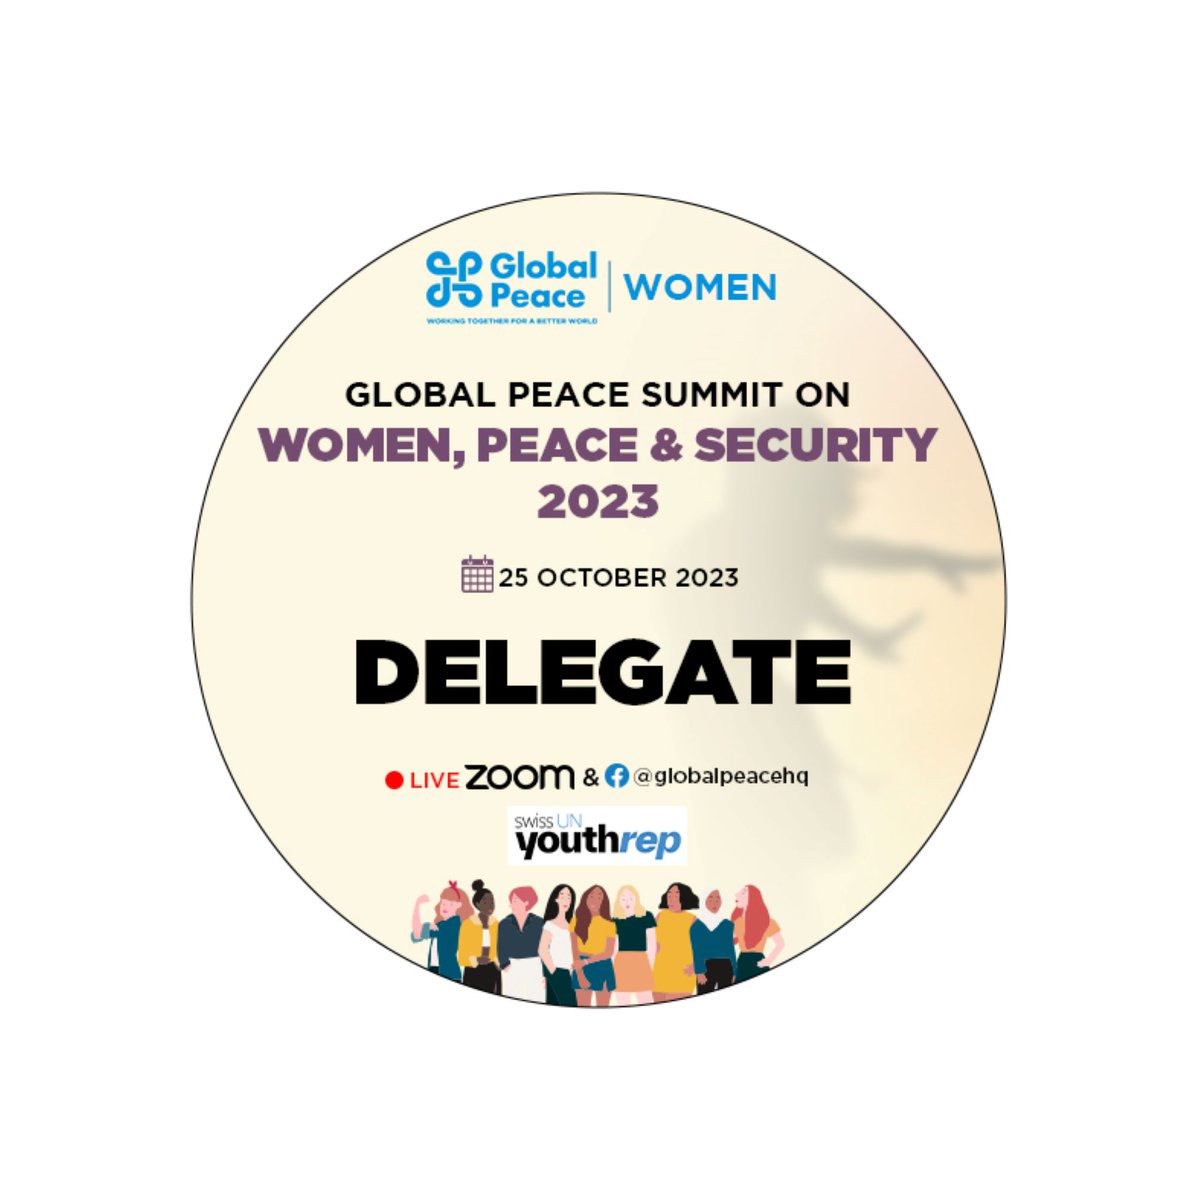 Happening Now!!!
Participating as a Delegate at Global Peace Summit on Women, Peace and Security to address women's role in peace building and security in times of conflict. #SwissUN #YouthRep @UN_Women @EqualGen